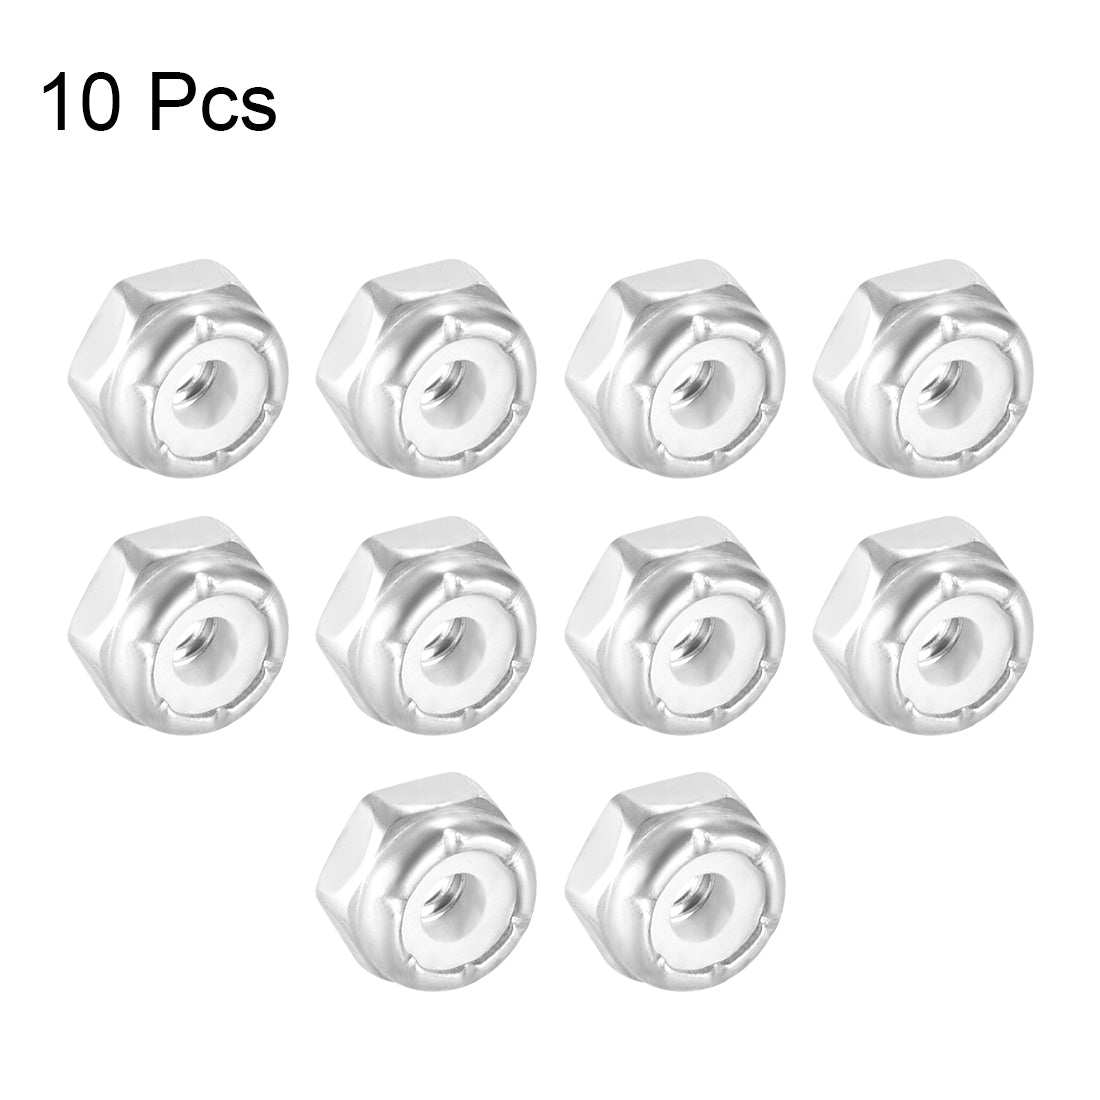 uxcell Uxcell 4#-40 Hex Lock Nuts Stainless Steel Nylon Insert Self-Lock Nuts, 10Pcs Silver